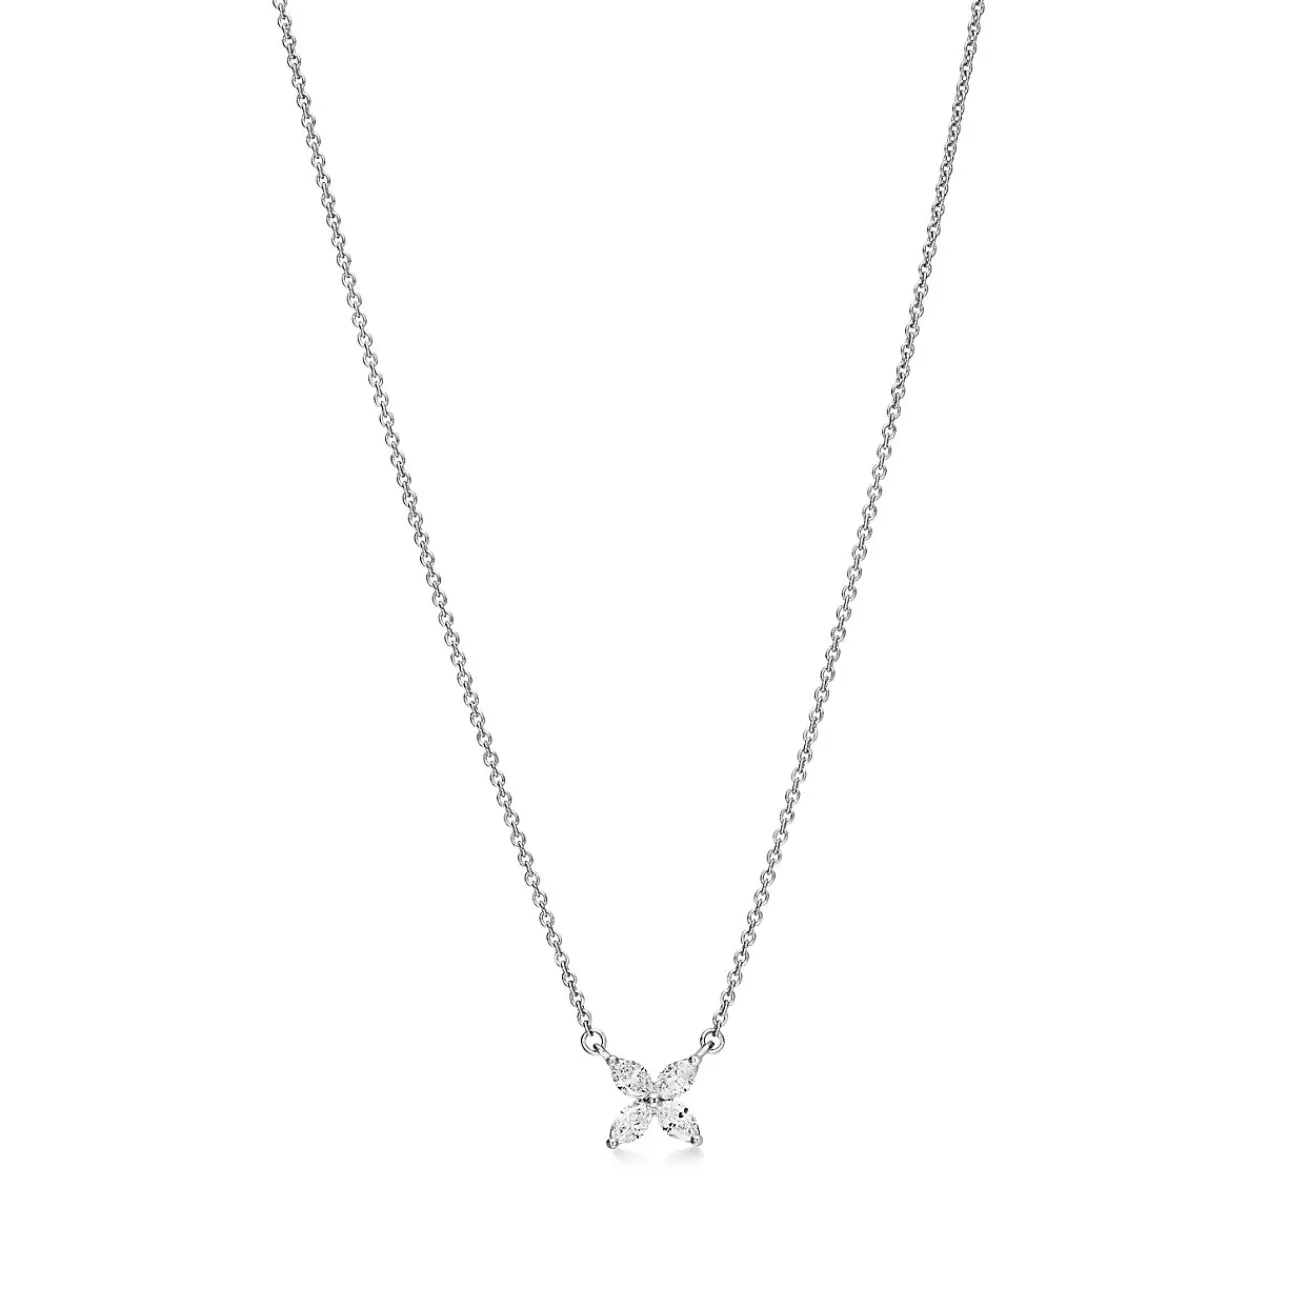 Tiffany & Co. Tiffany Victoria® pendant in platinum with diamonds, small. | ^ Necklaces & Pendants | Gifts for Her